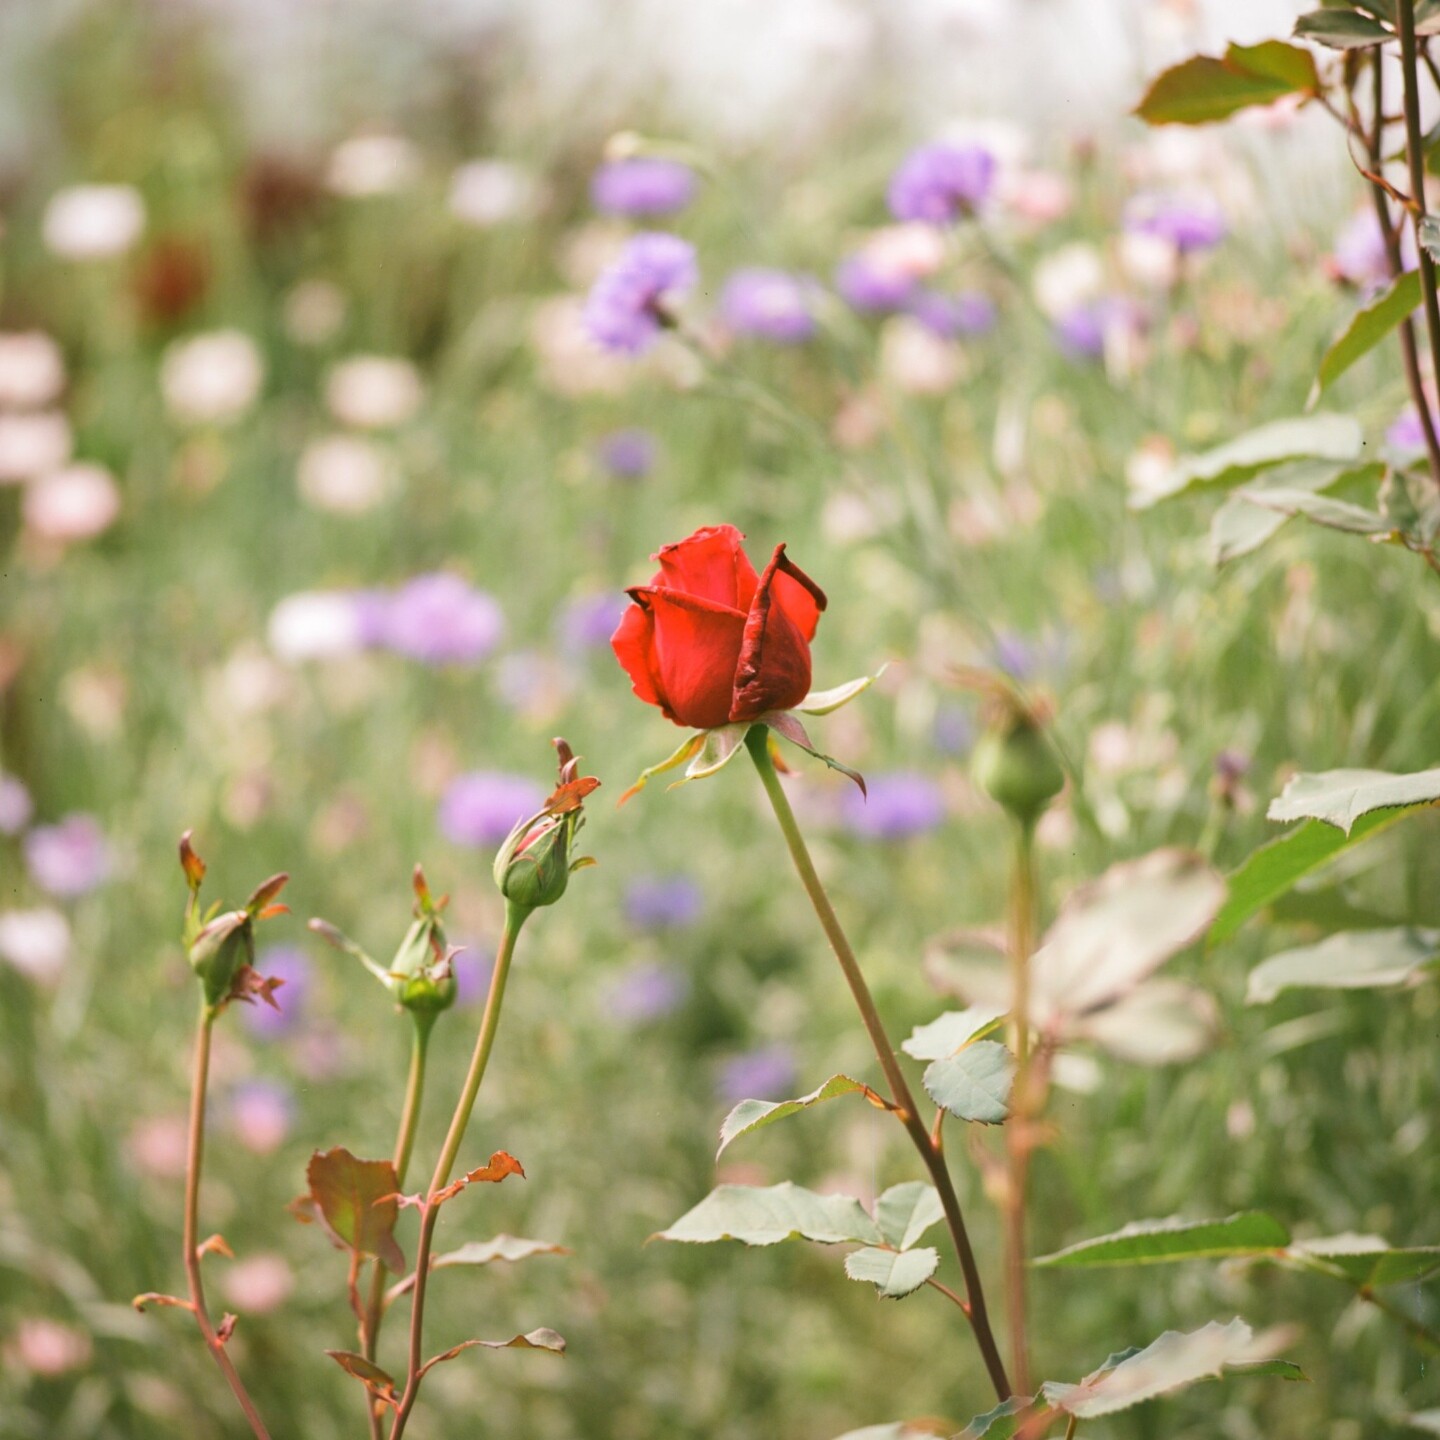 A colour photograph of a single red rose with a green and purple and pink garden full of flowers out of focus behind it.